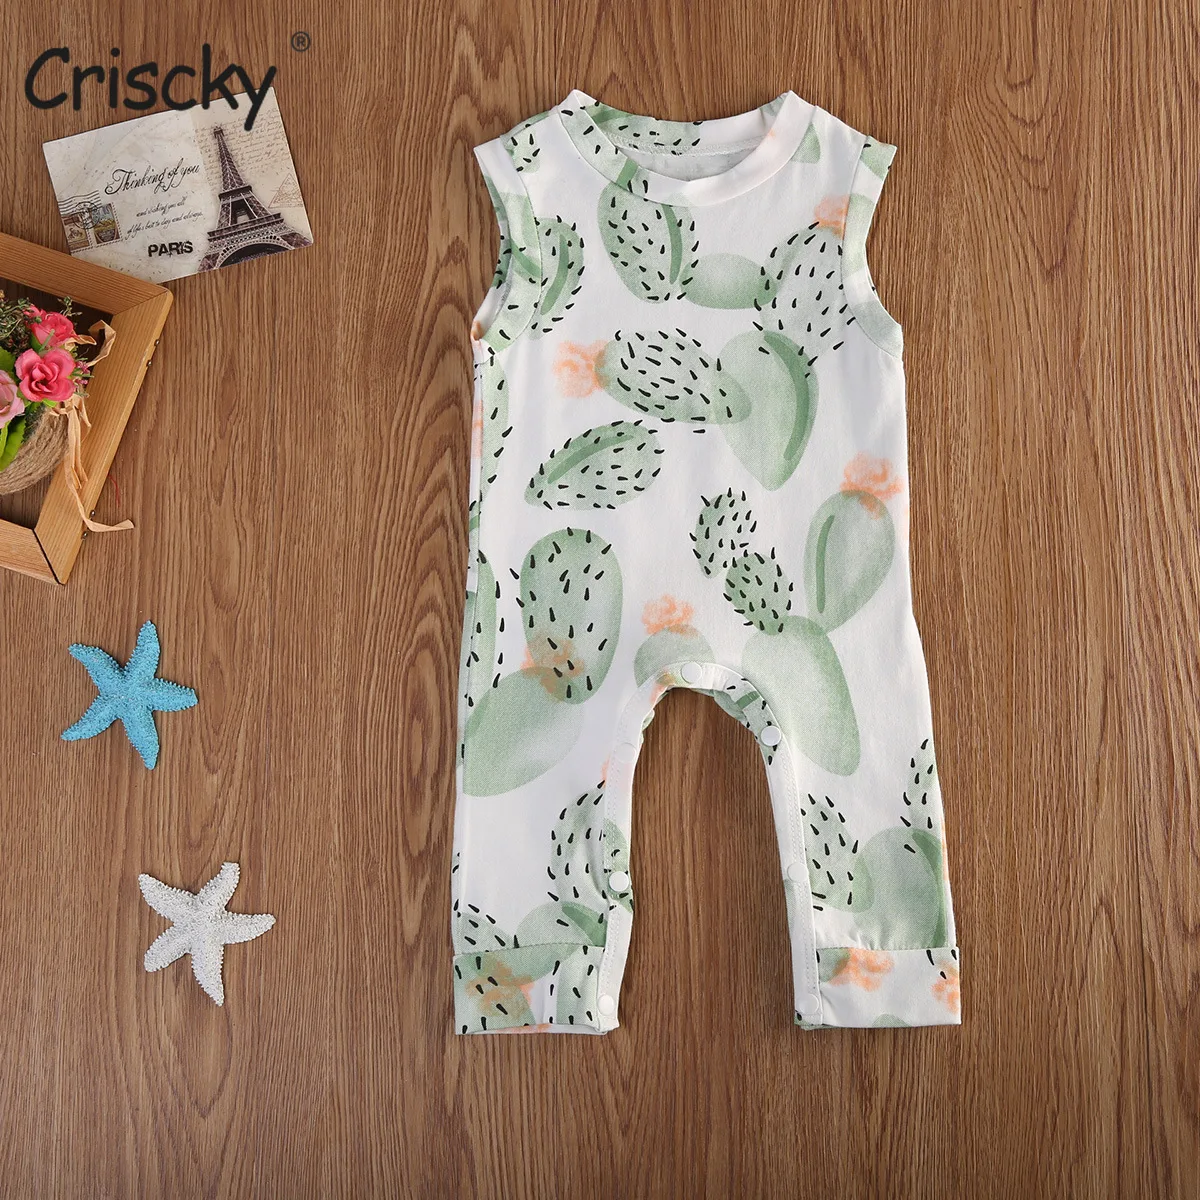 

Criscky Baby Boys Girls Romper Summer Toddler Newborn Infant Sleeveless Print Cotton Jumpsuits Playsuits Overalls Outfits